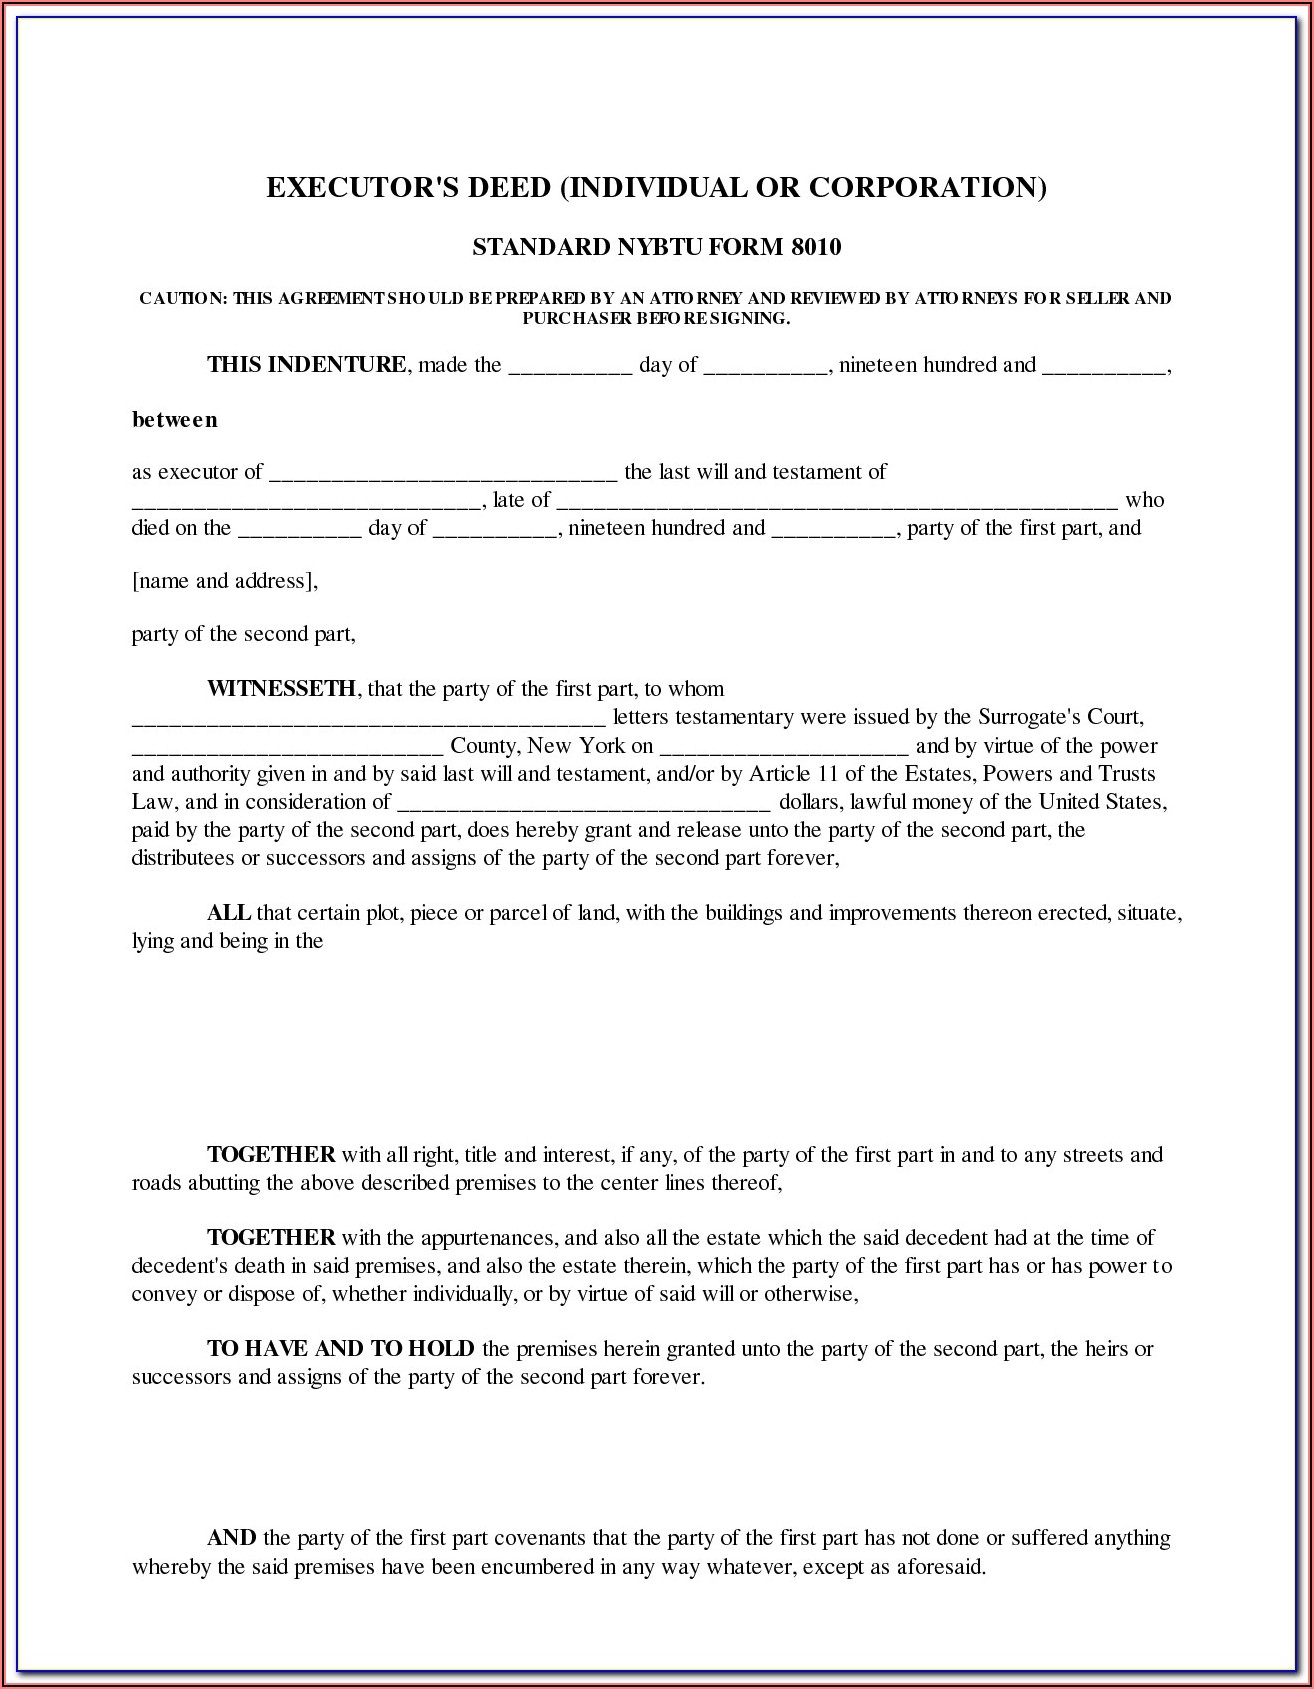 Montana Last Will And Testament Form